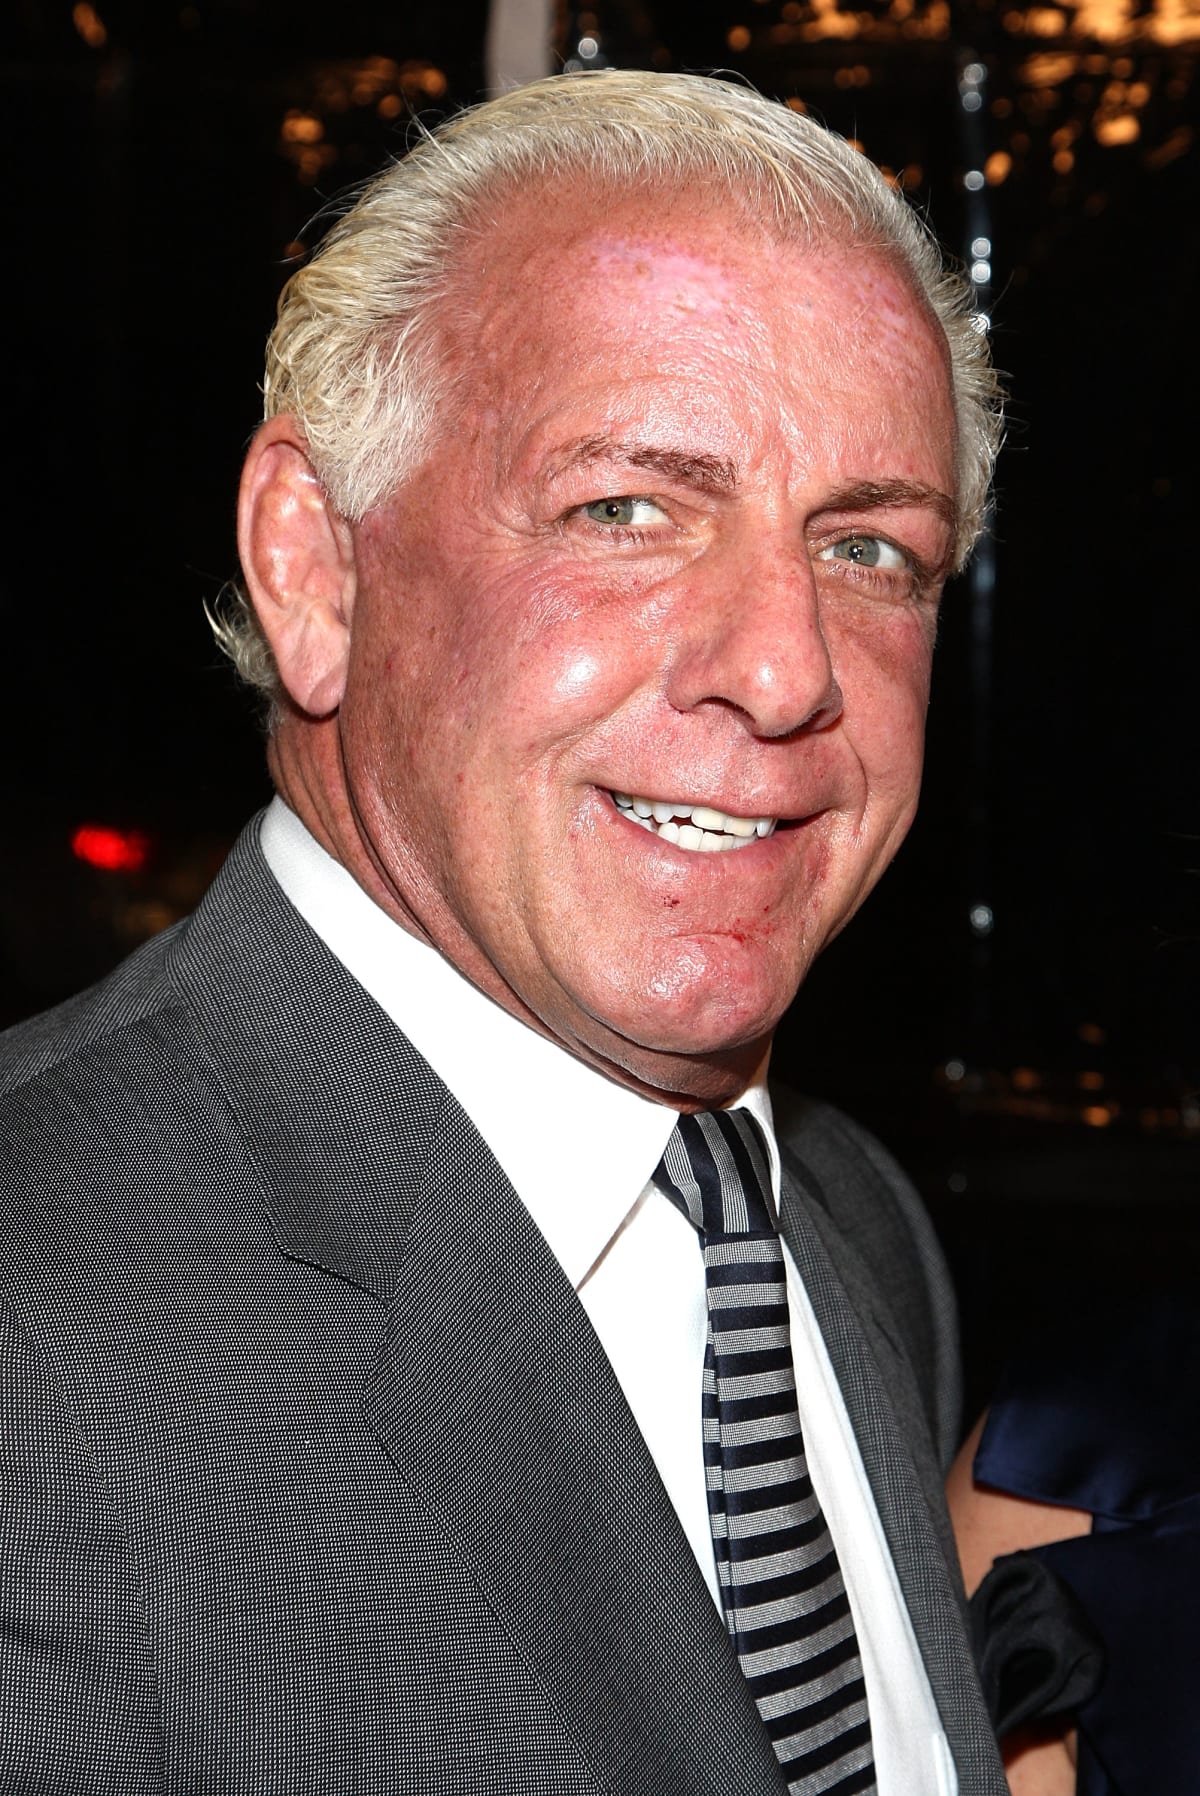 NASHVILLE, TENNESSEE - JULY 31: Wrestler Ric Flair is seen at Nashville Municipal Auditorium on July 31, 2022 in Nashville, Tennessee. (Photo by Jason Kempin/Getty Images)